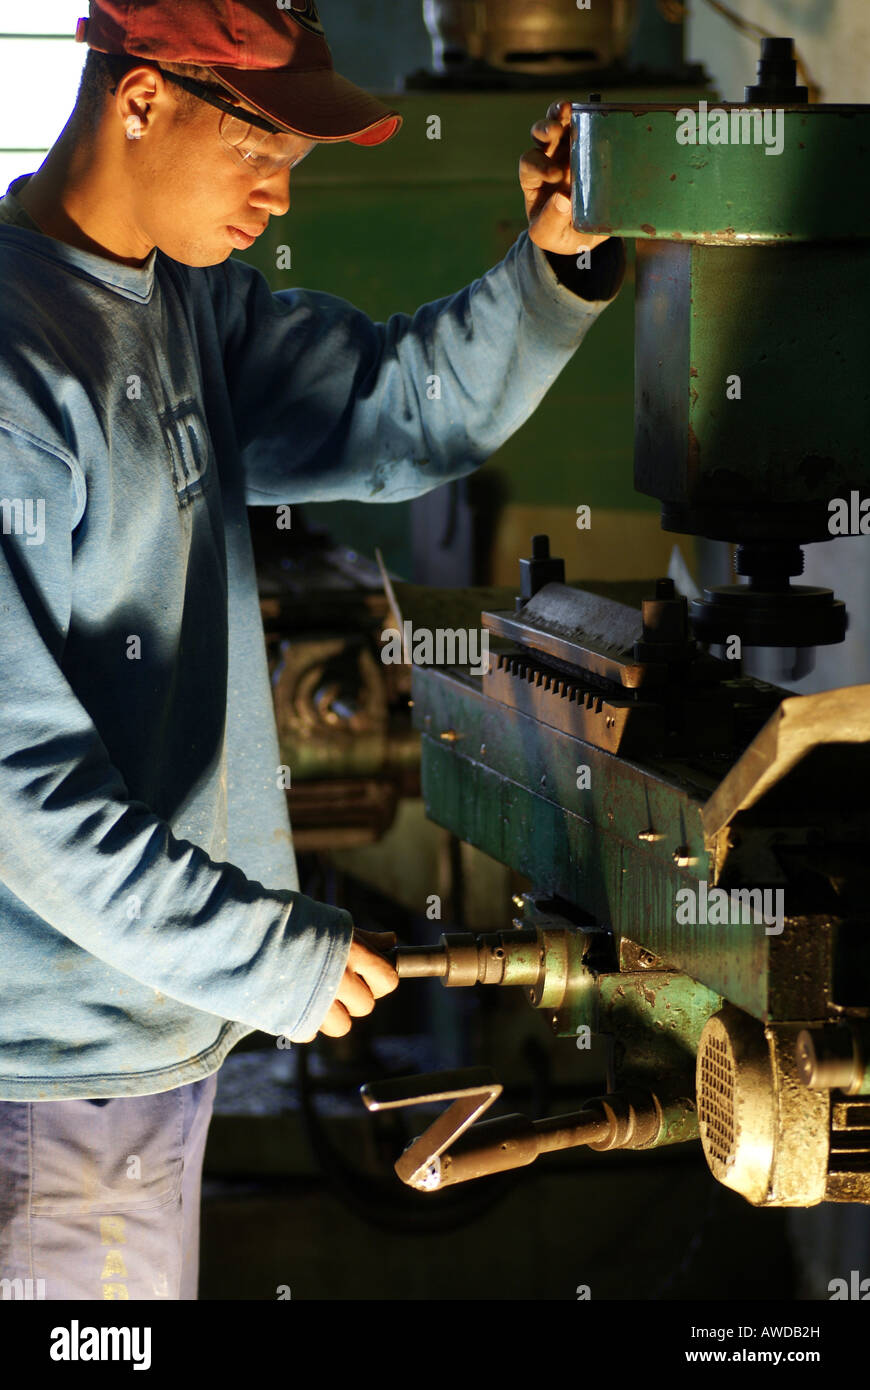 Adolescent Trainee at a milling Machine in the metal industry, Petropolis, Rio de Janeiro, Brazil Stock Photo